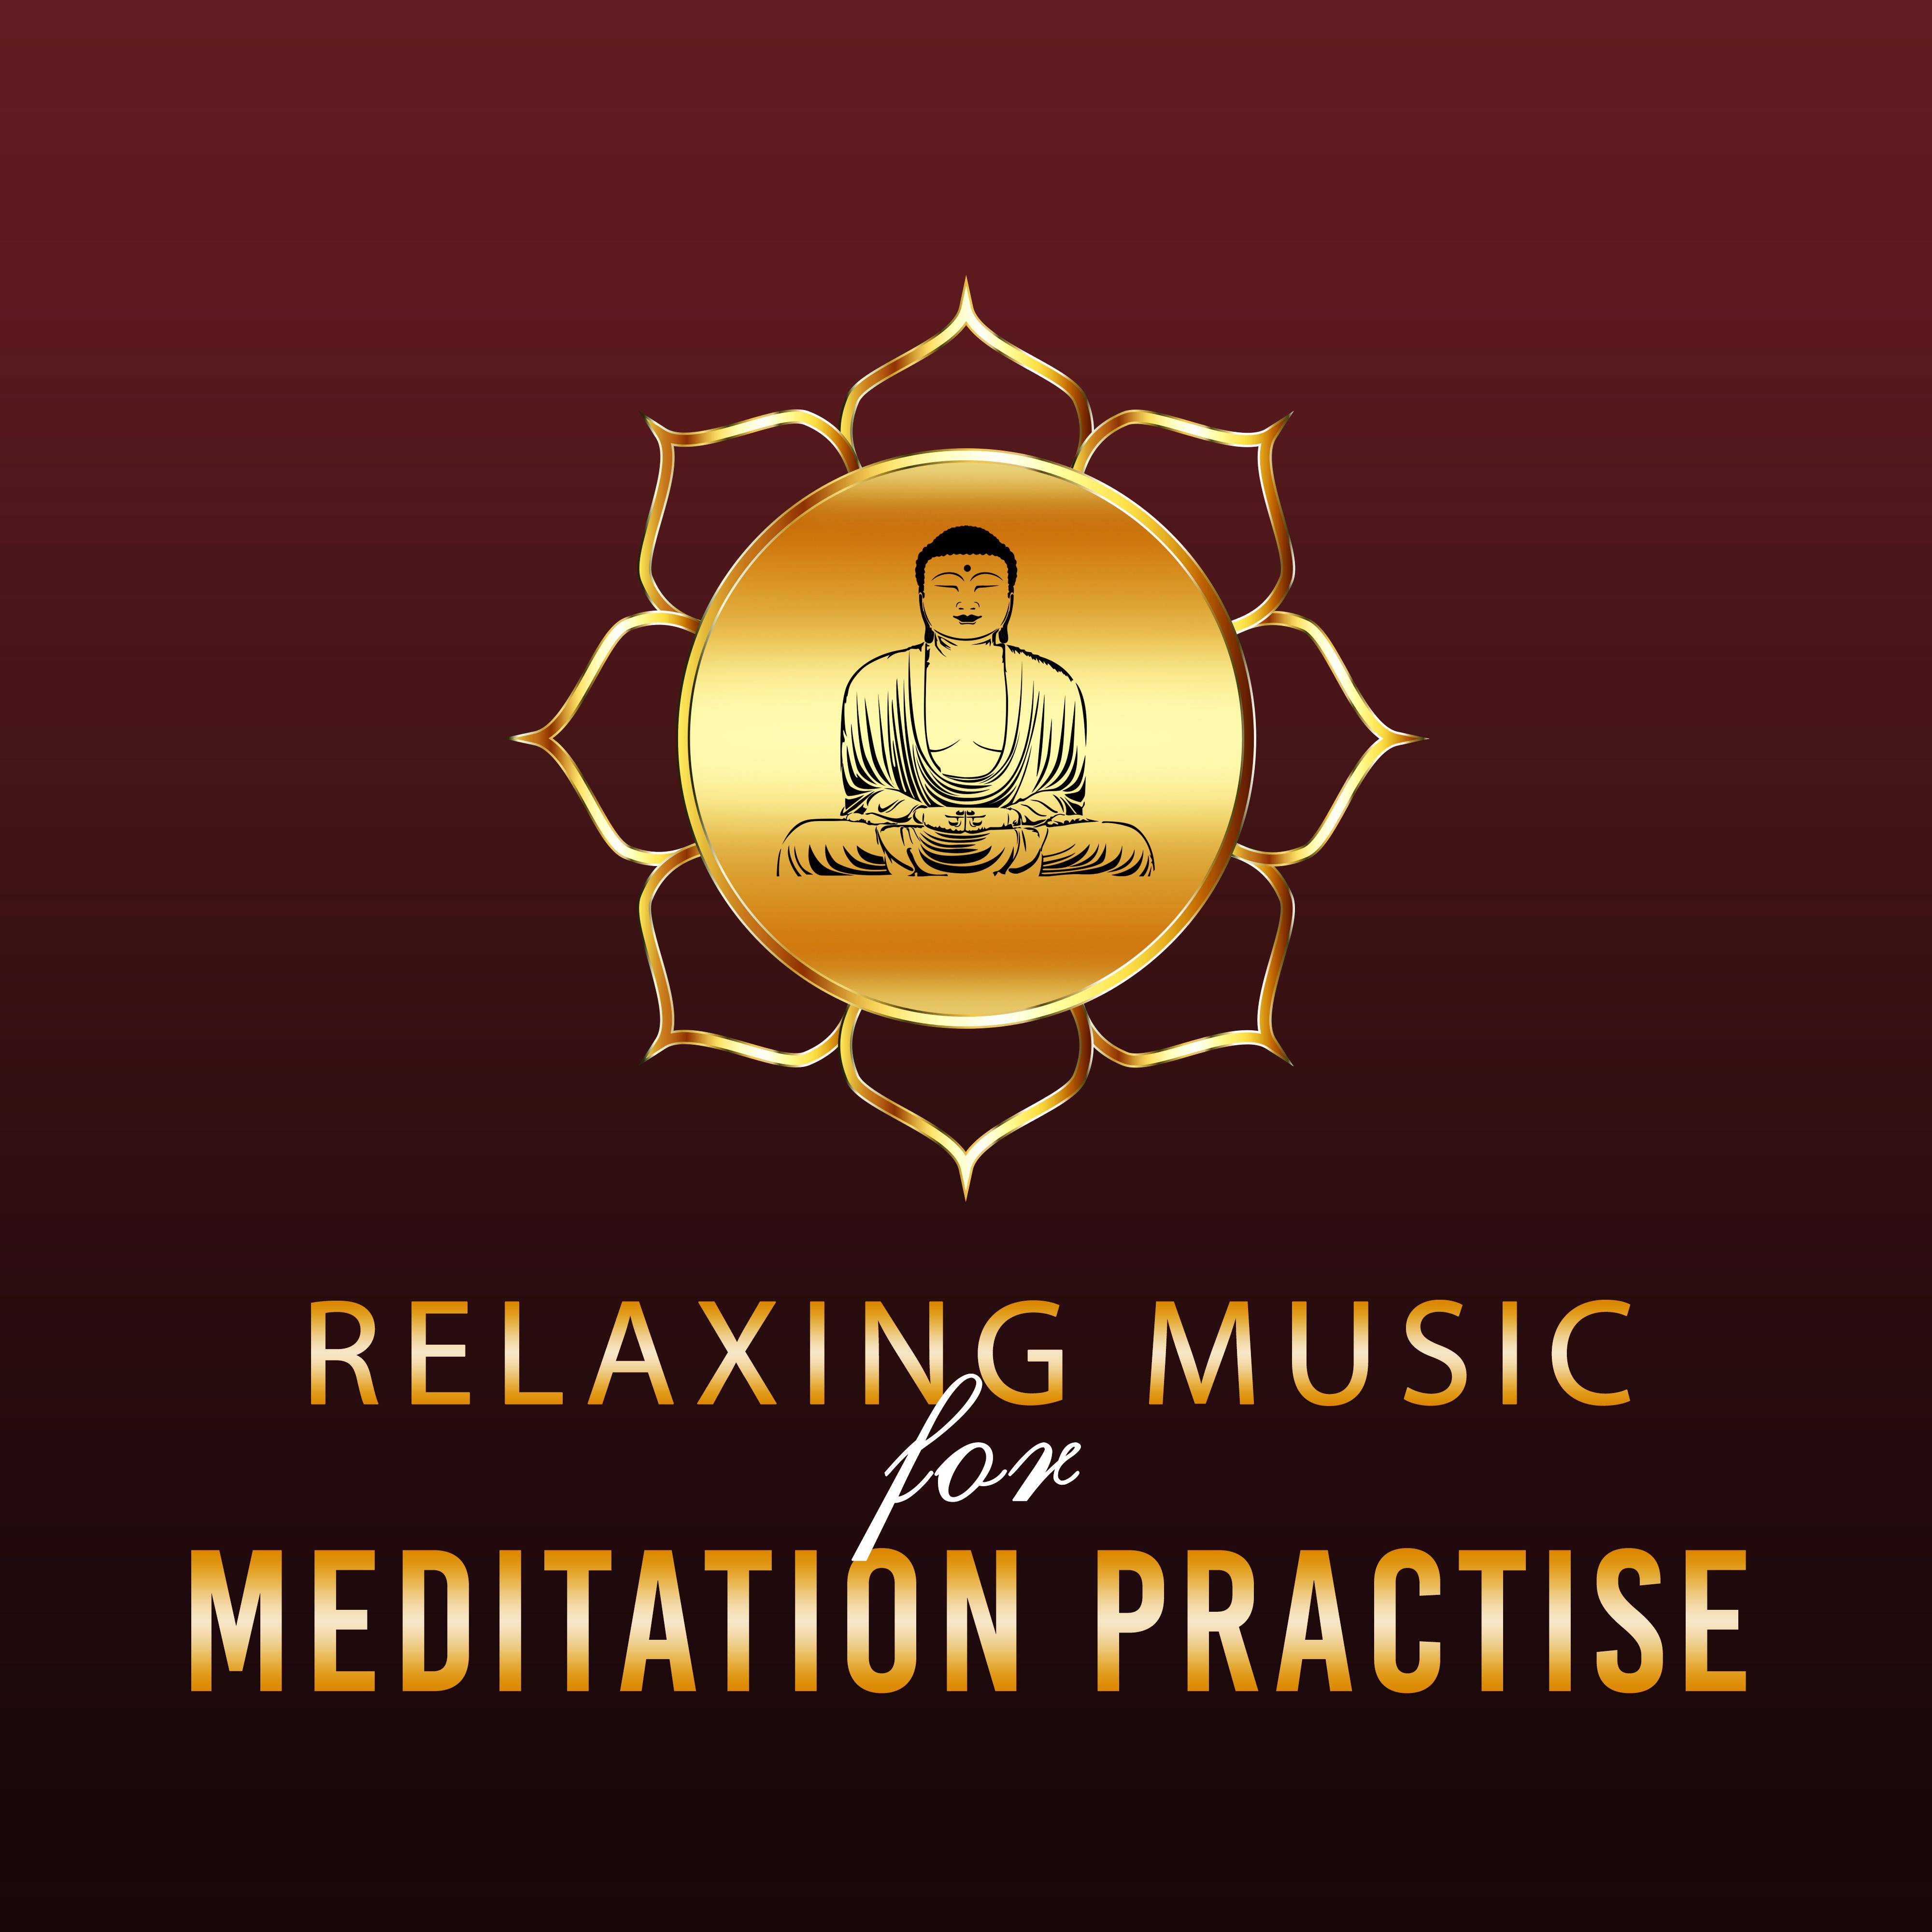 Relaxing Music for Meditation Practise – Peaceful Songs of Nature, Music for Meditation Yoga, Relaxation, Instrumental New Age